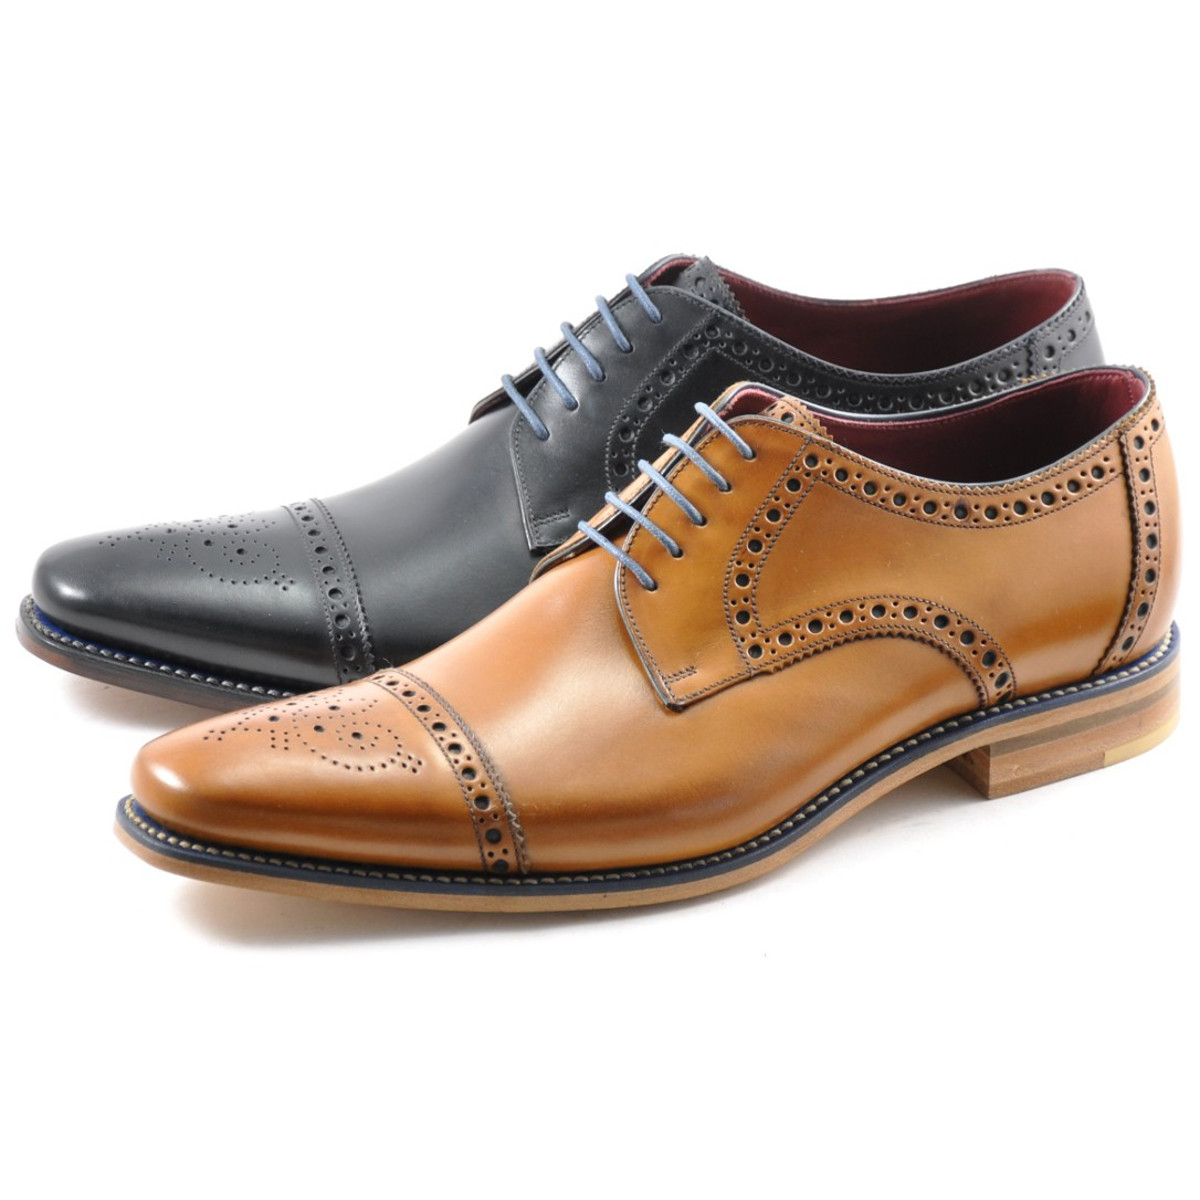 best price loake shoes off 63% - www 